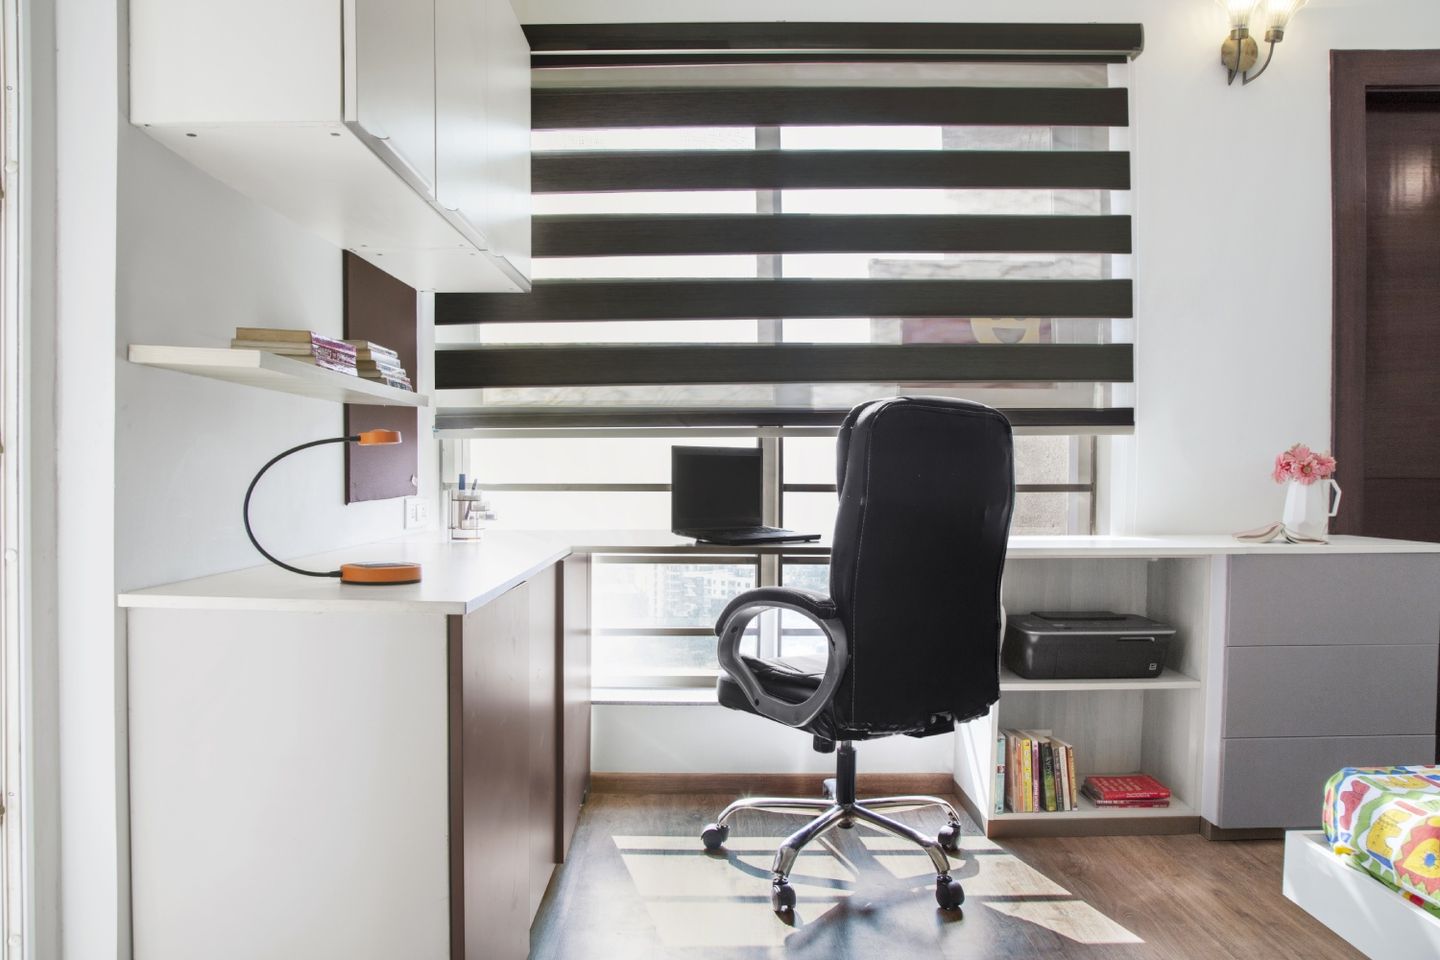 9X7 Ft Grey And White Home Office Design - Livspace